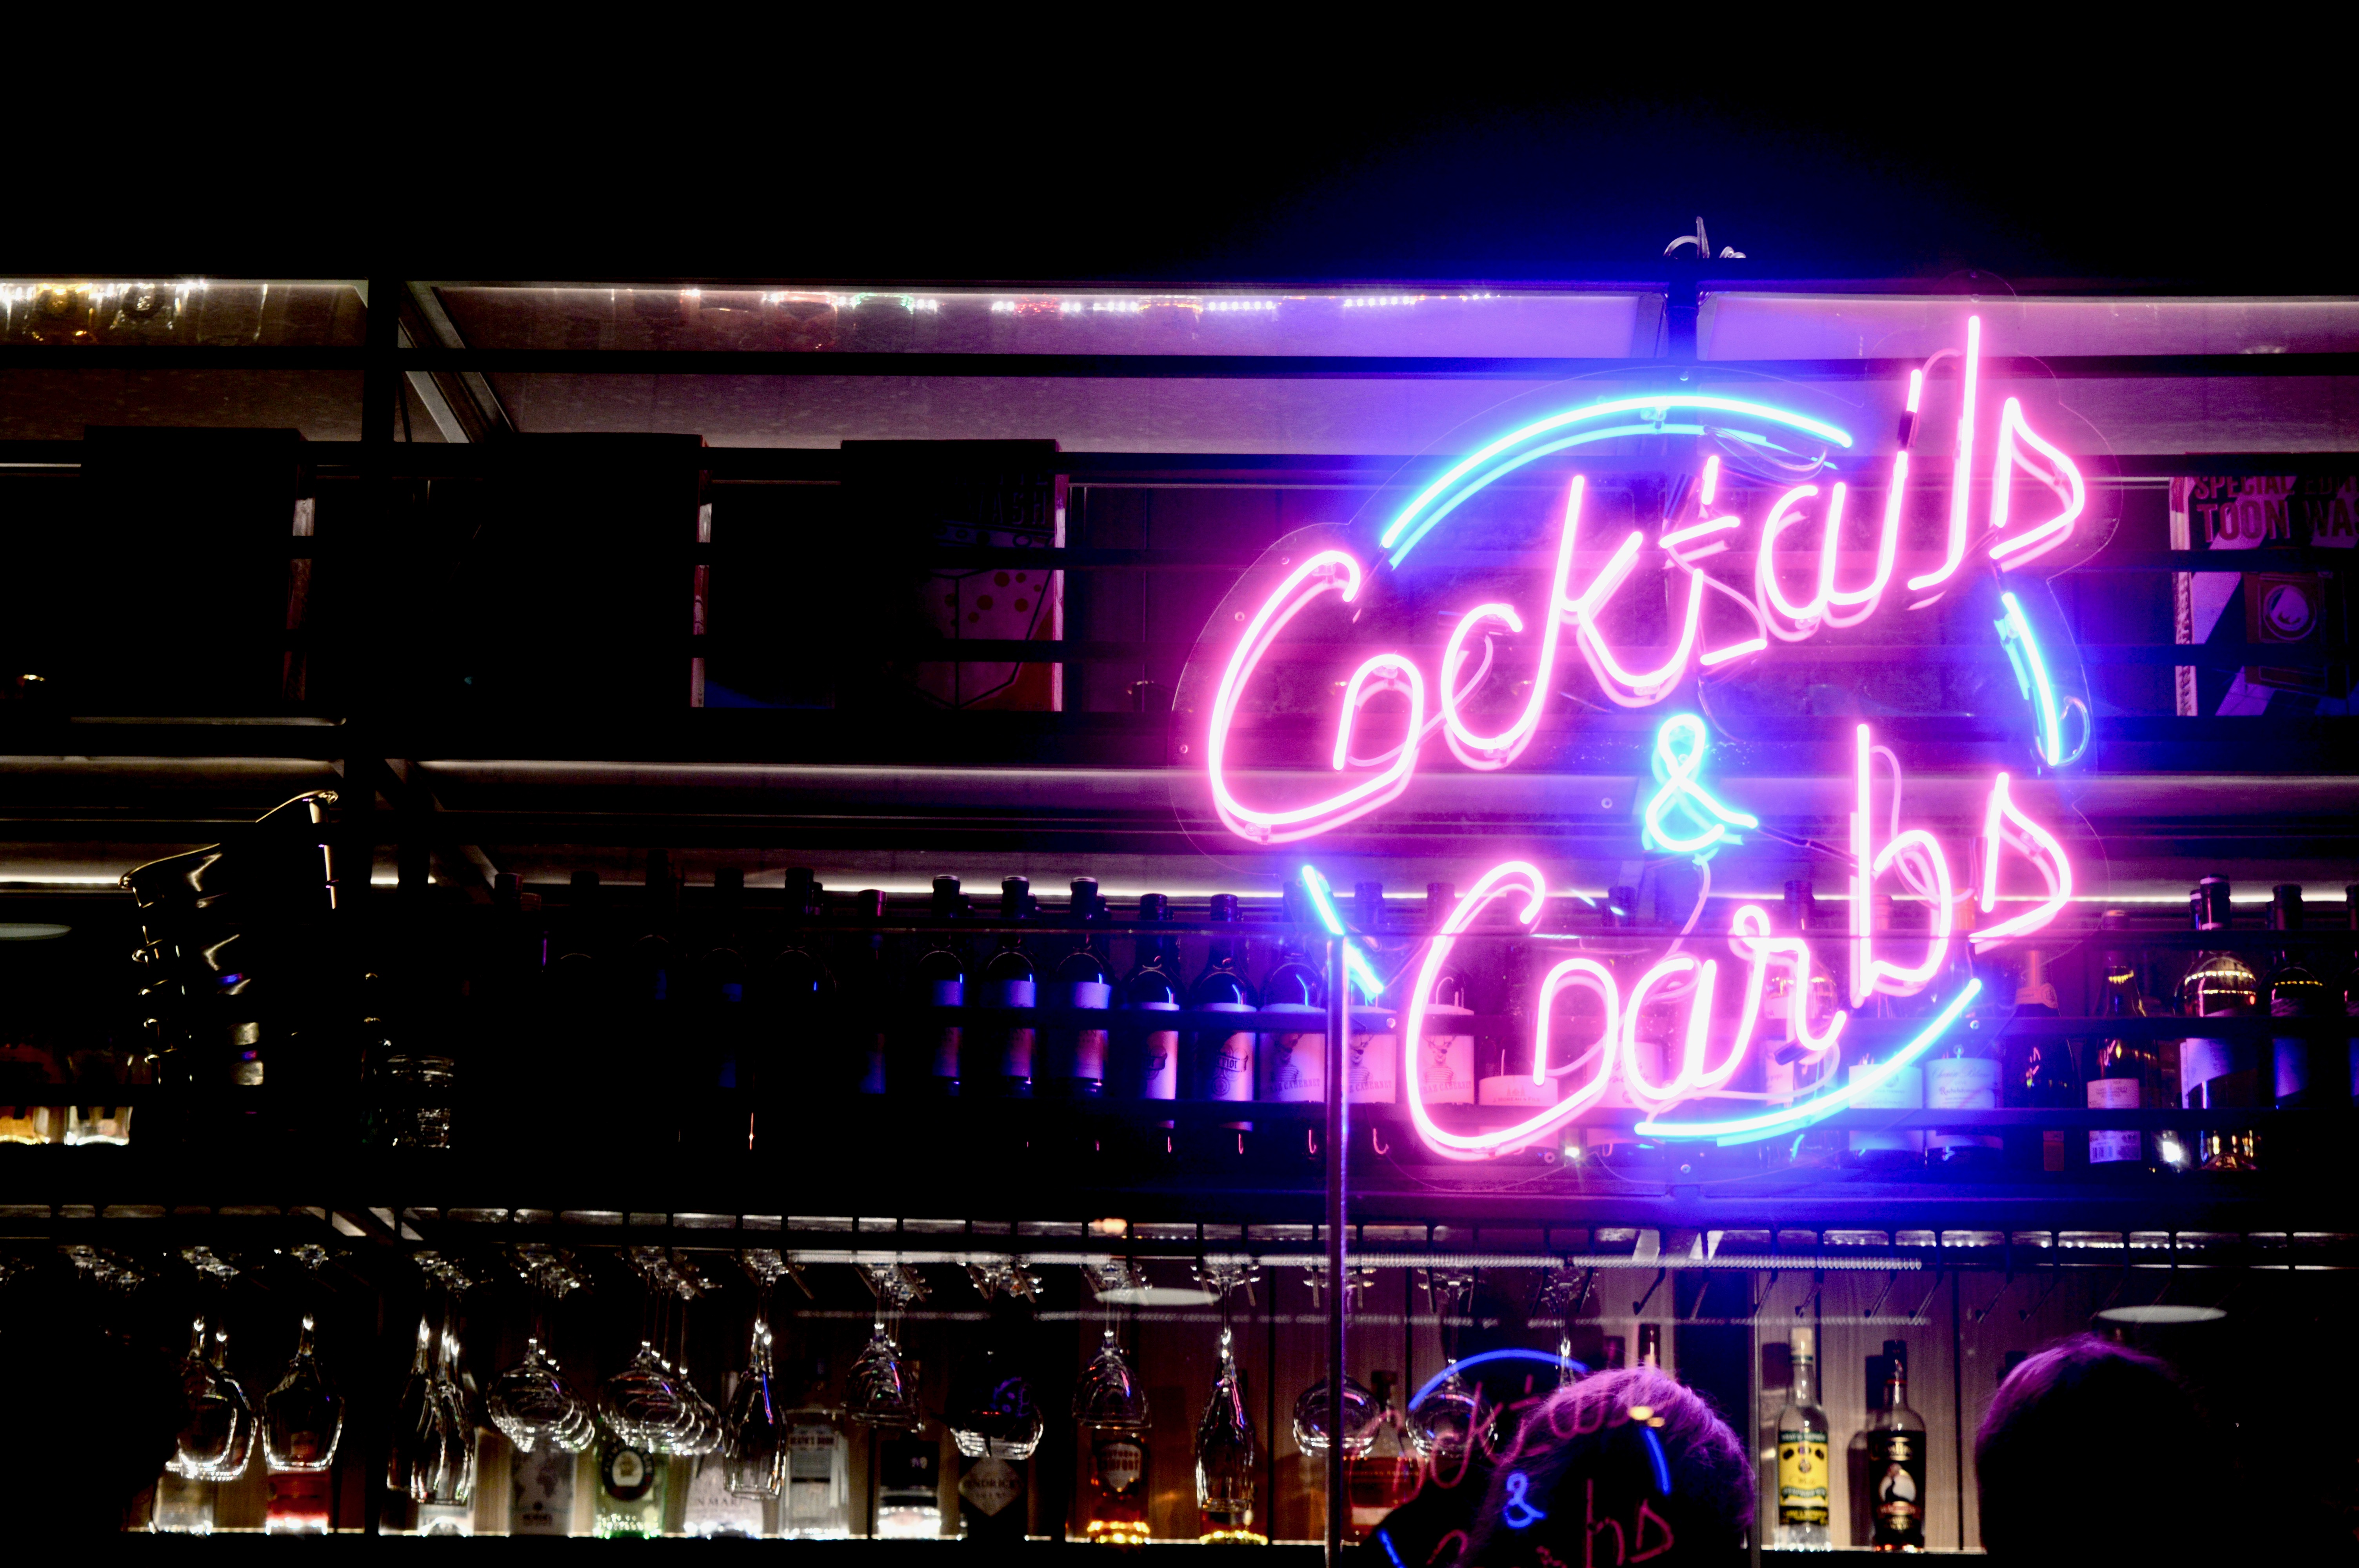 We reviewed the food and cocktail menu at The Laundrette, one of Newcastle's newest hotspots, opposite Central Station| Newcastle City Centre | Check out our thoughts and review | Elle Blonde Luxury Lifestyle Destination Blog